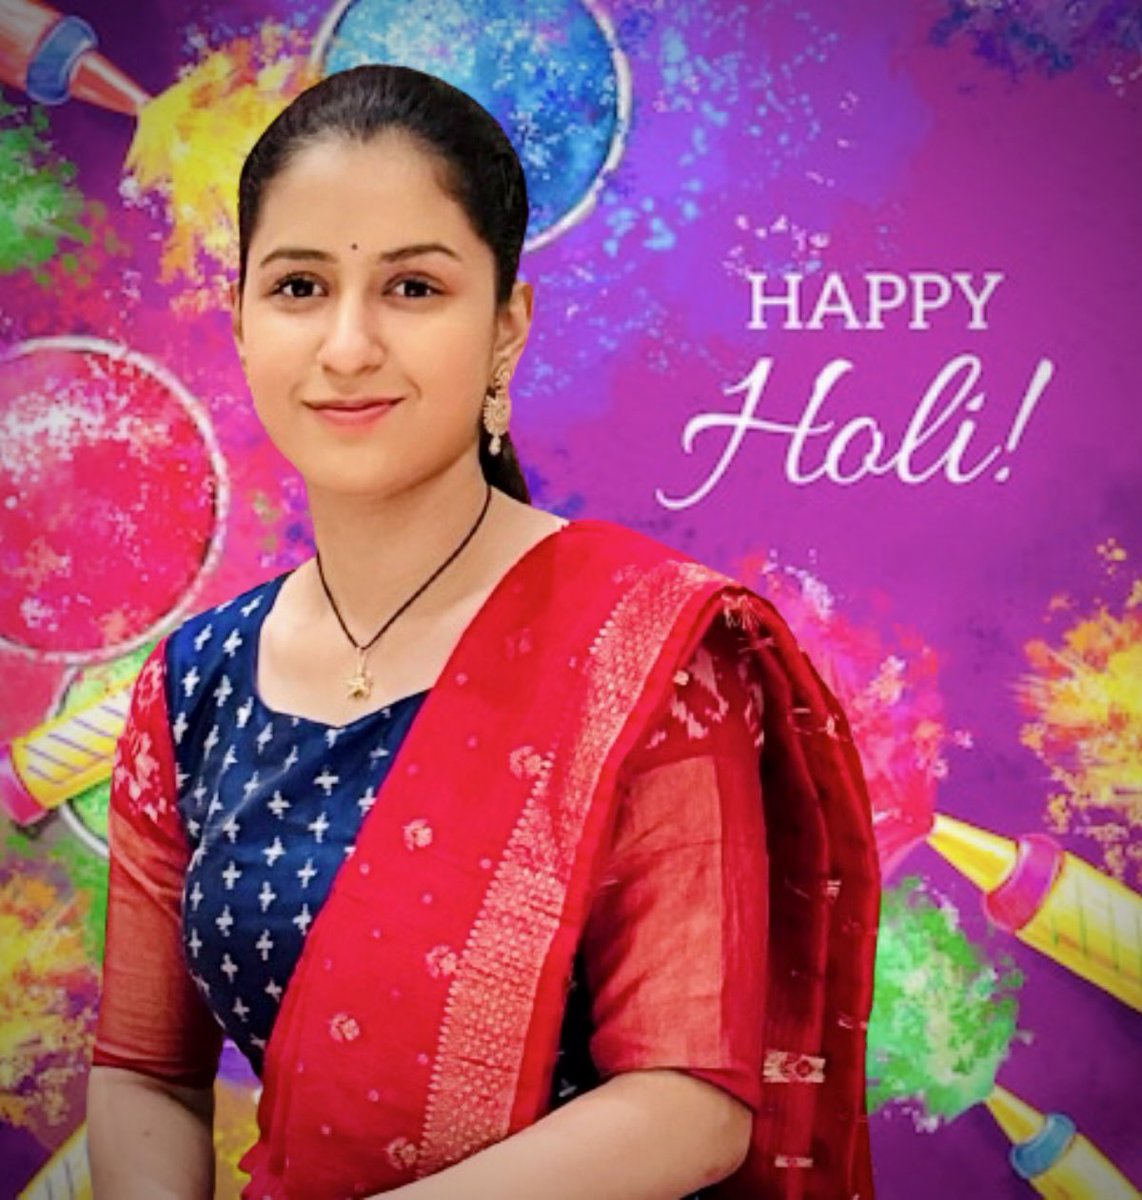 Happy Holi to one and all💐